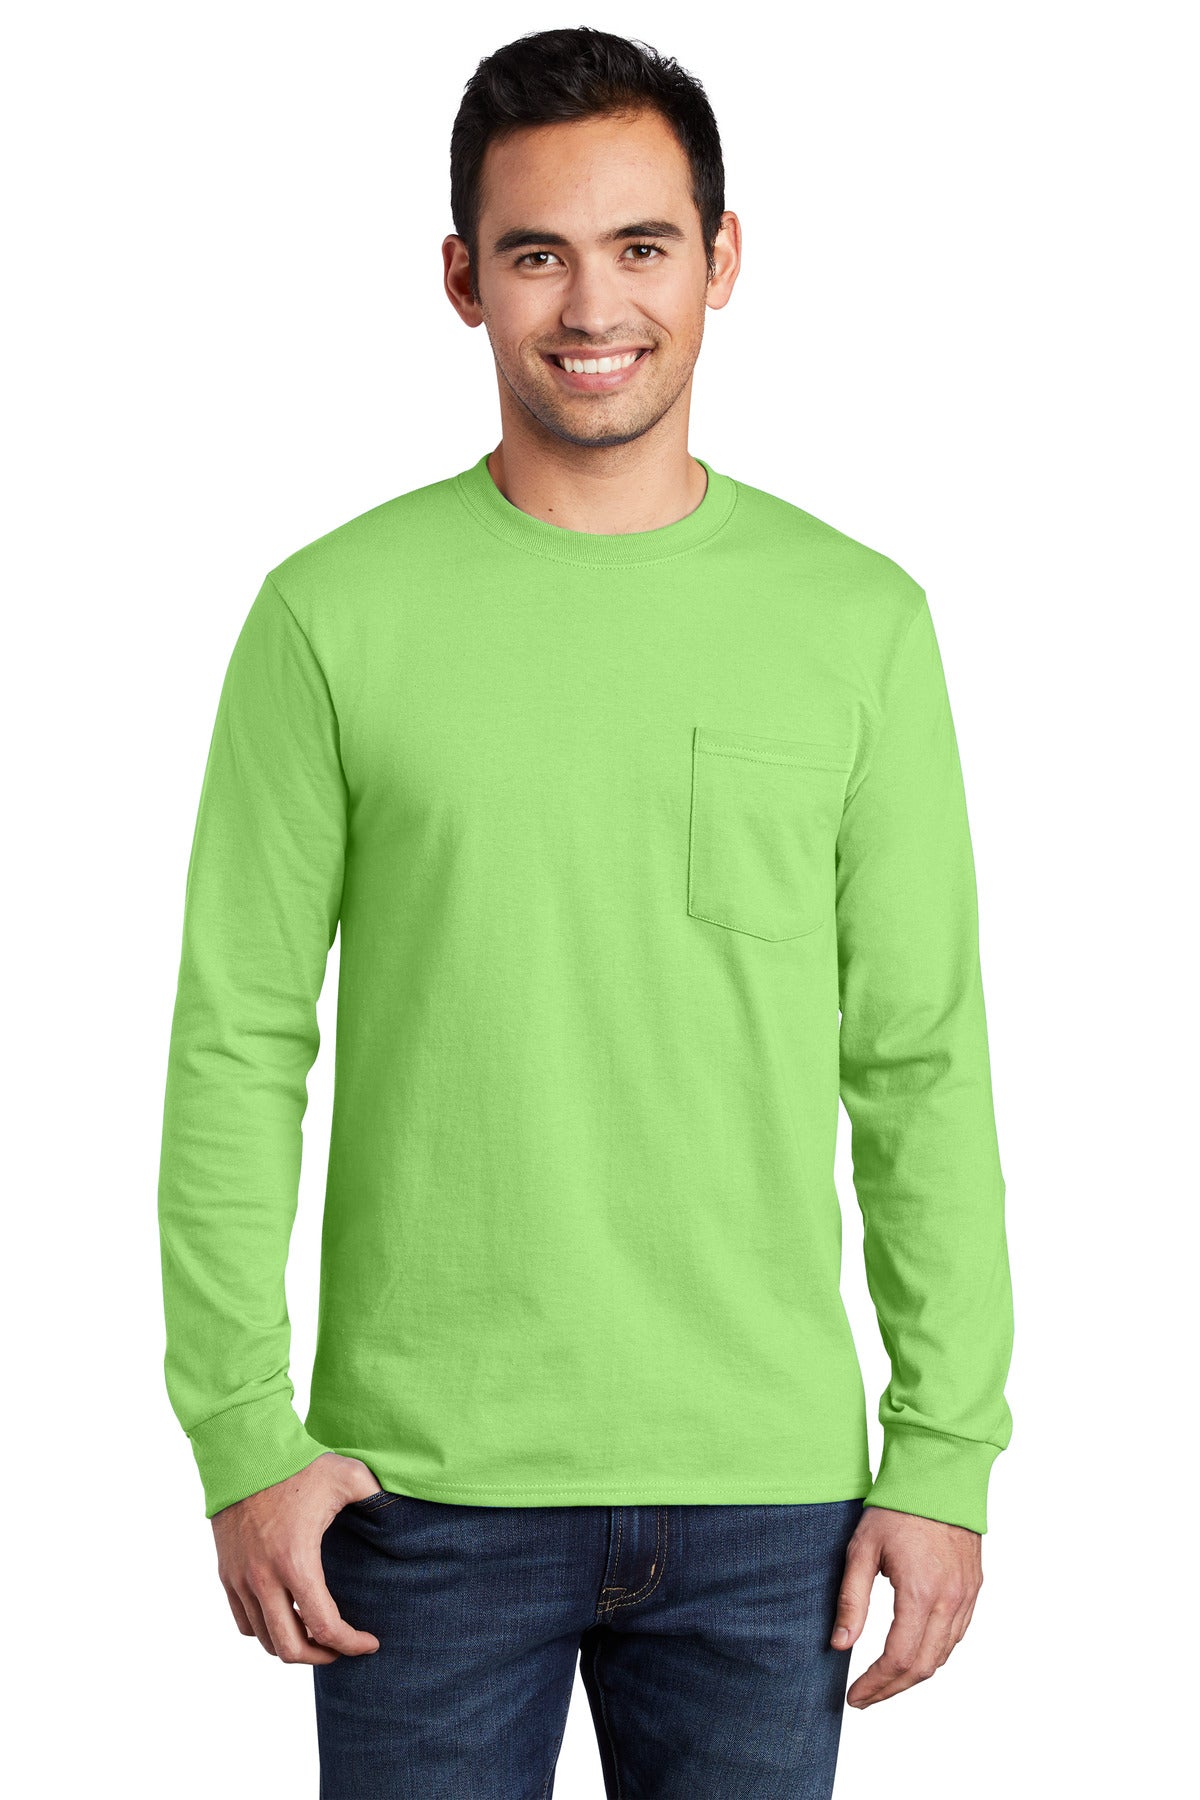 PC61LSPT-Lime-L-Tall